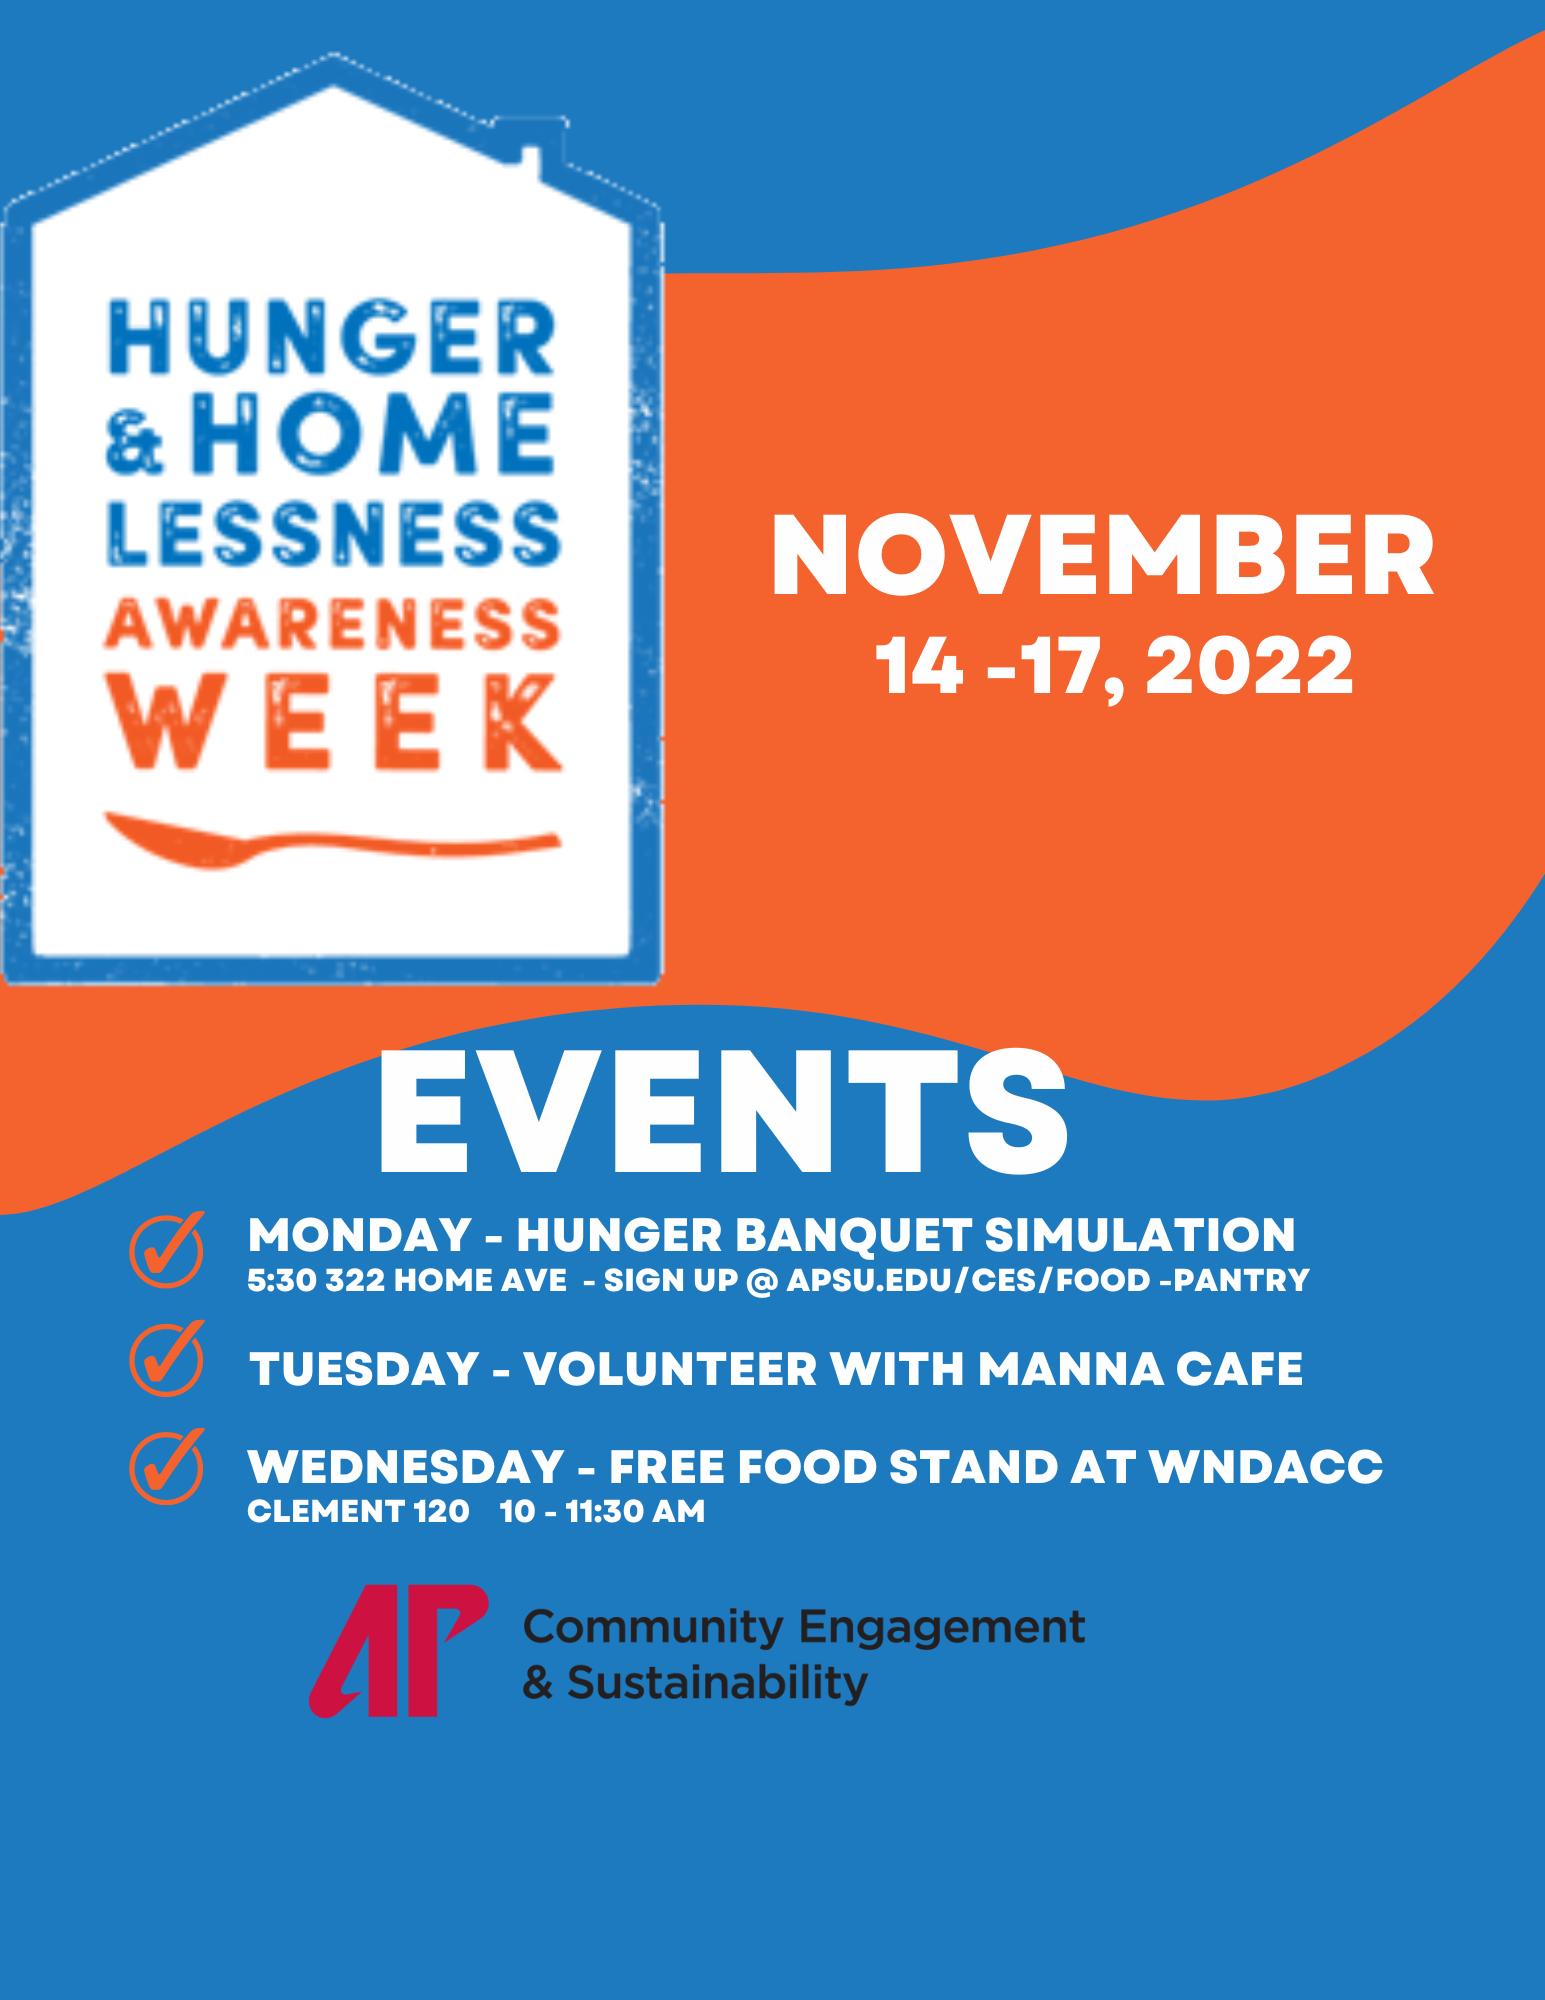 Hunger and Homelessness week events